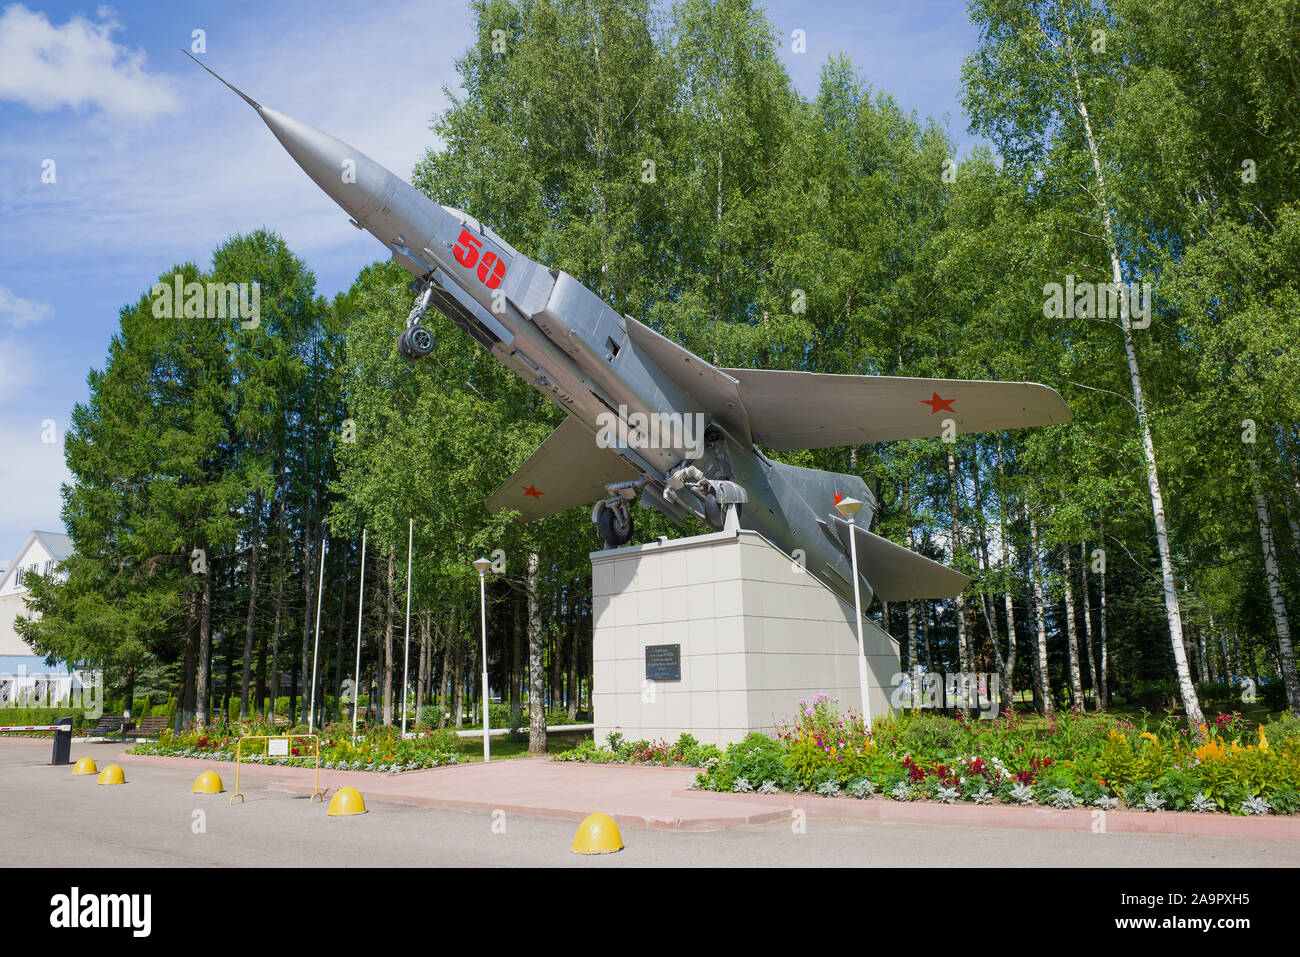 GAVRILOV-YAM, RUSSIA - JULY 15, 2019: Monument airplane MiG-23 on a sunny July day Stock Photo